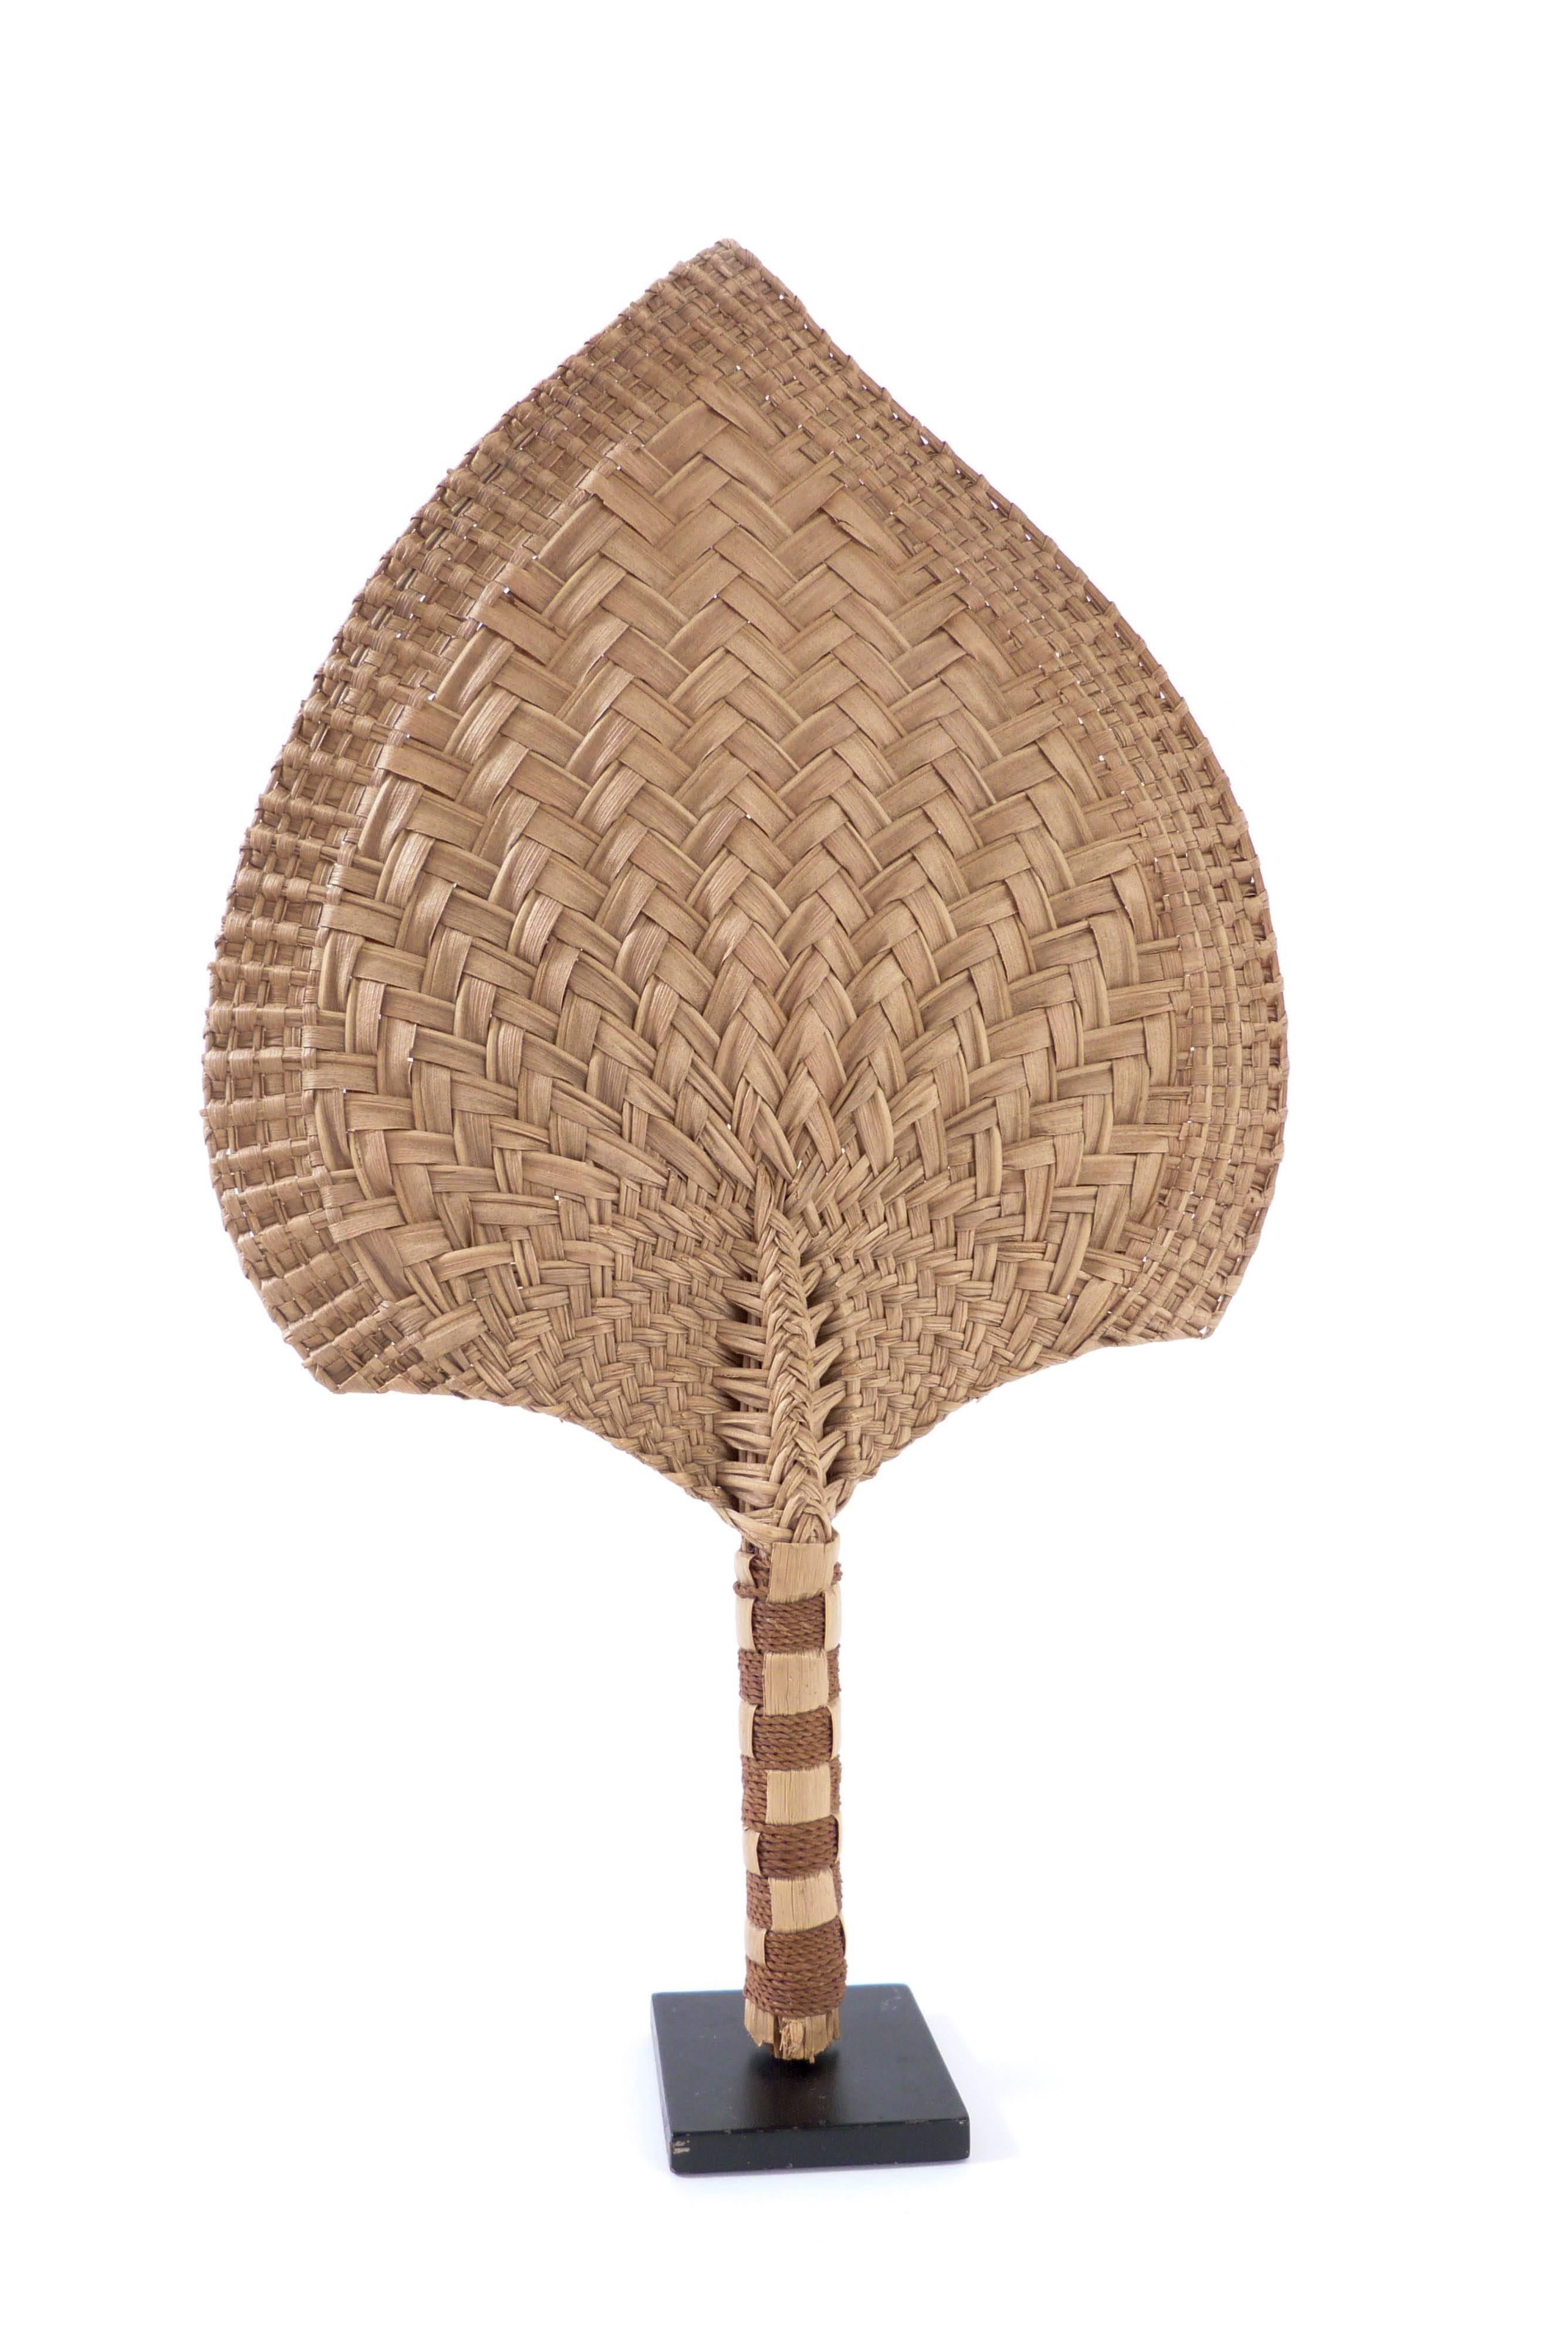 A Tongan palm leaf fan in two colours with a sennit bound handle 38cm high. Provenance, The Melanesian Mission. Founded in 1849 by George Augustus Selwyn. The work of the Mission was primarily centred in Solomon Islands and Vanuatu, but did have